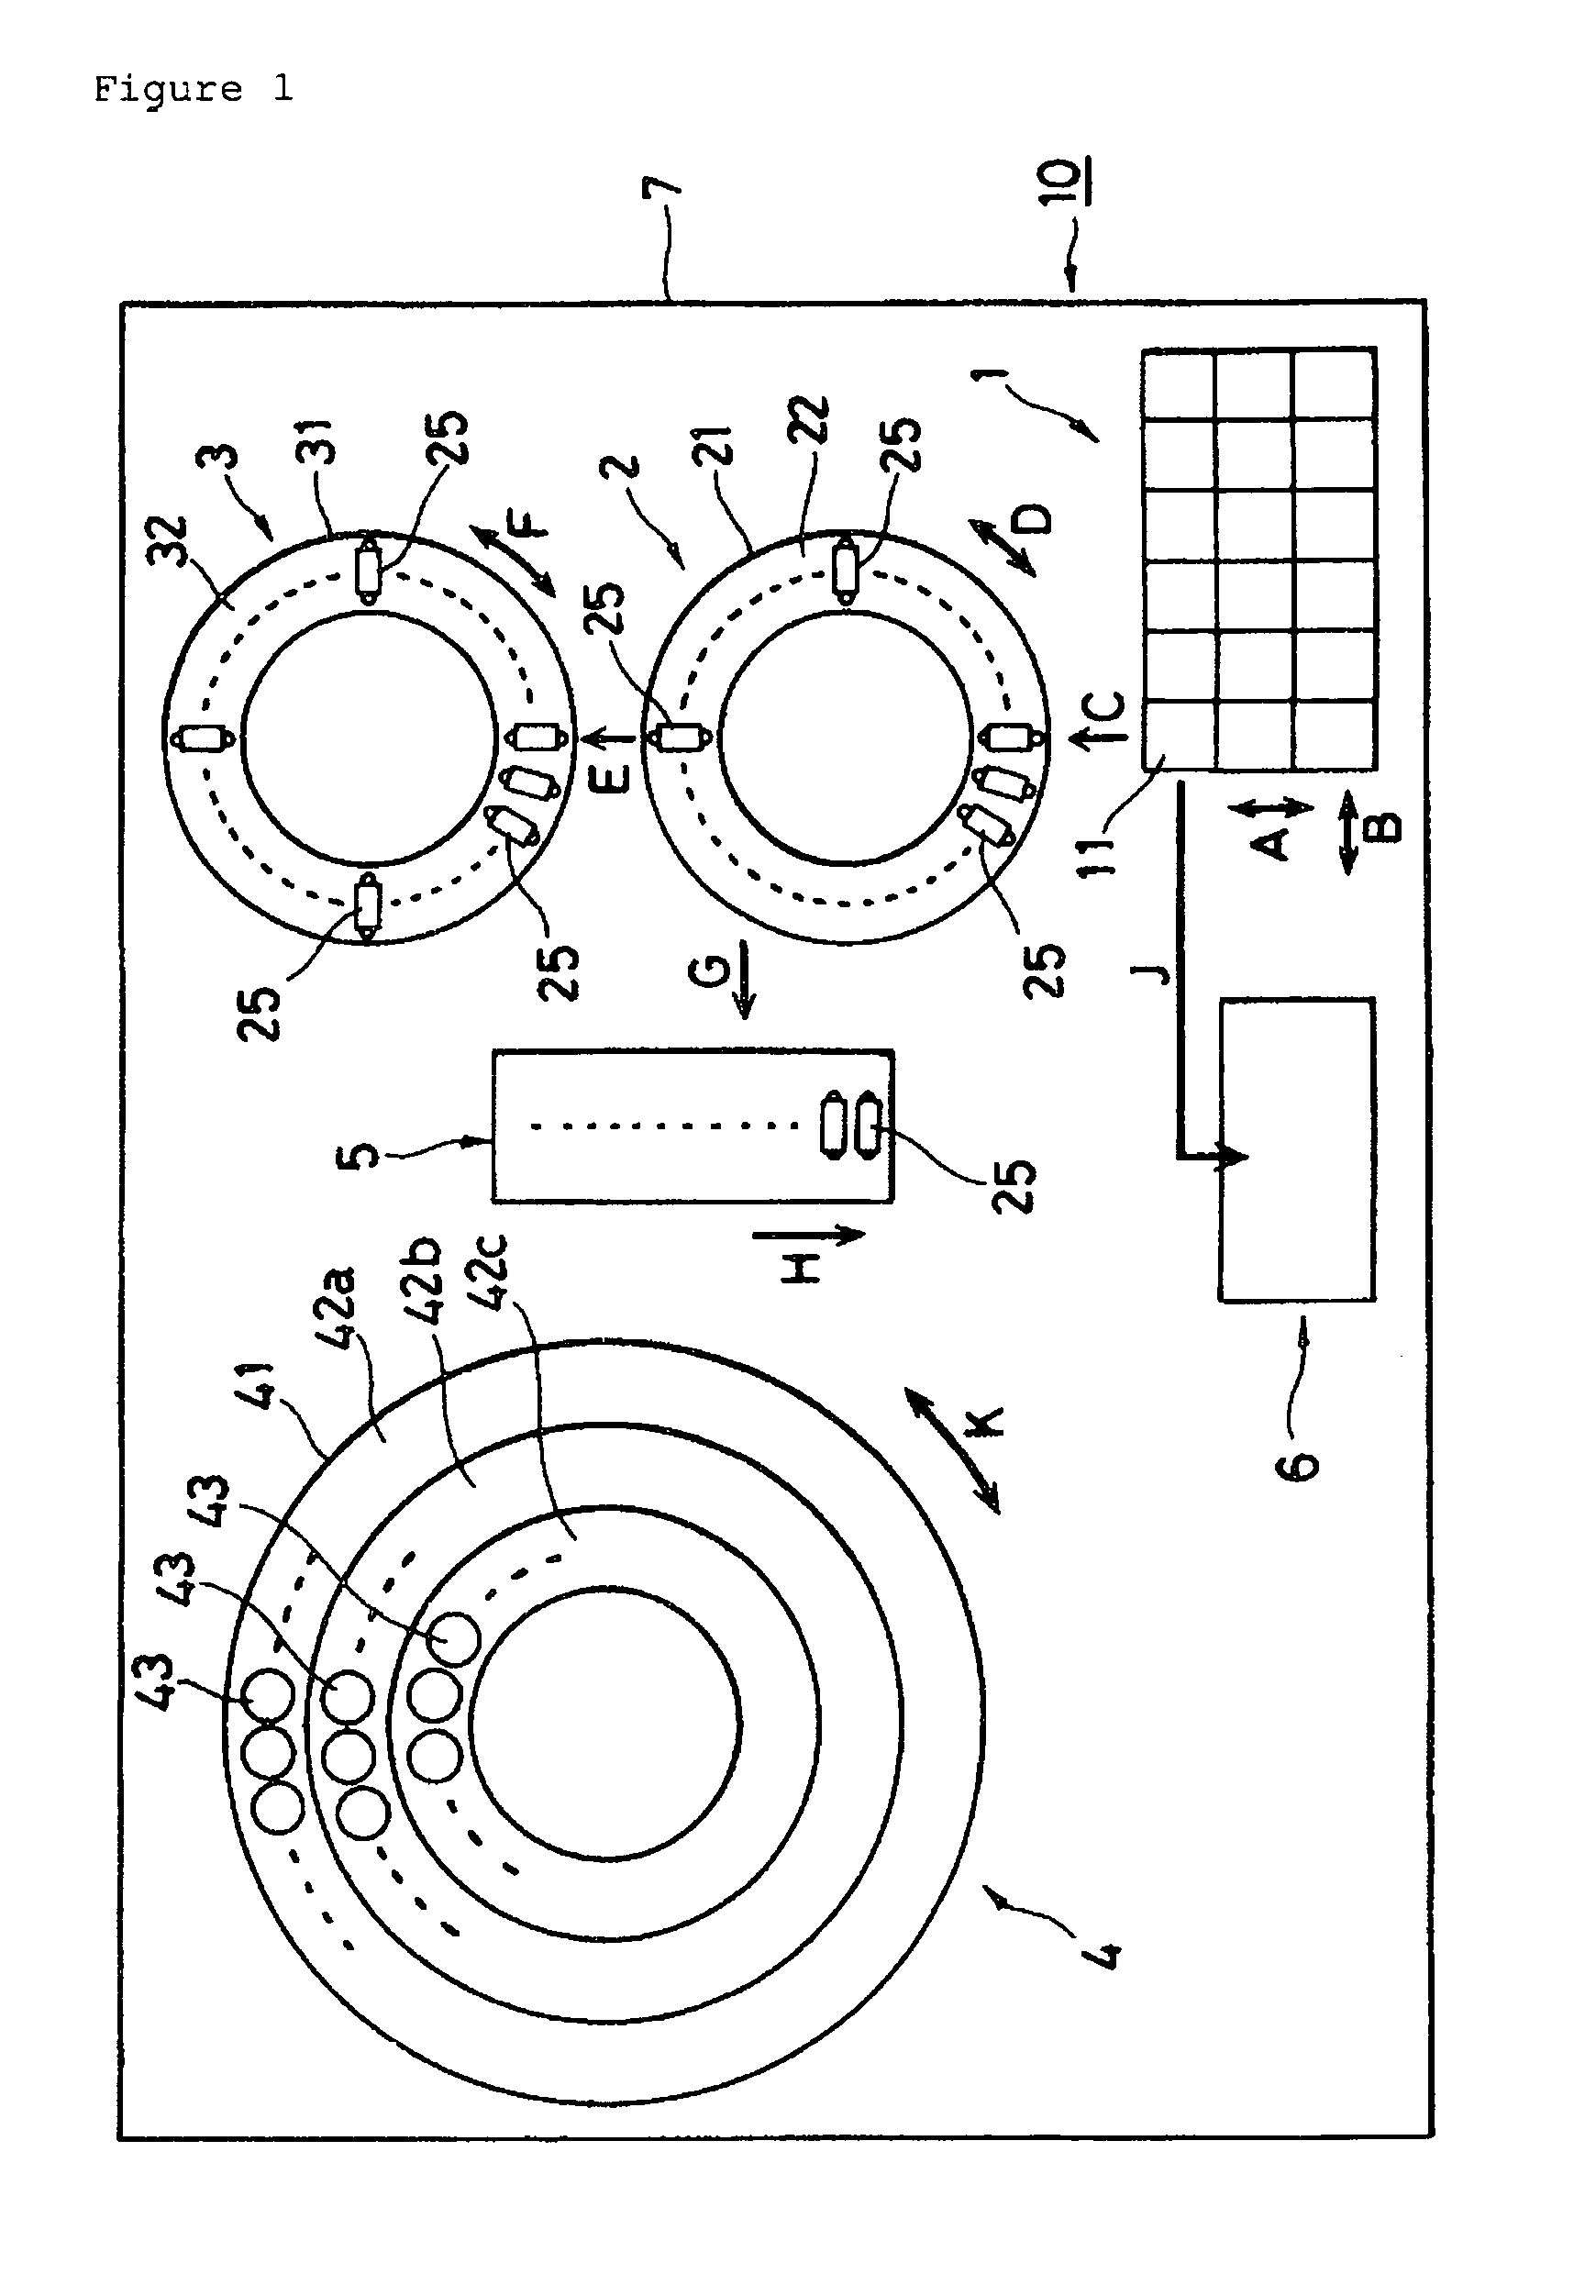 Apparatus for multiple automatic analysis of biosamples, method for autoanalysis, and reaction cuvette